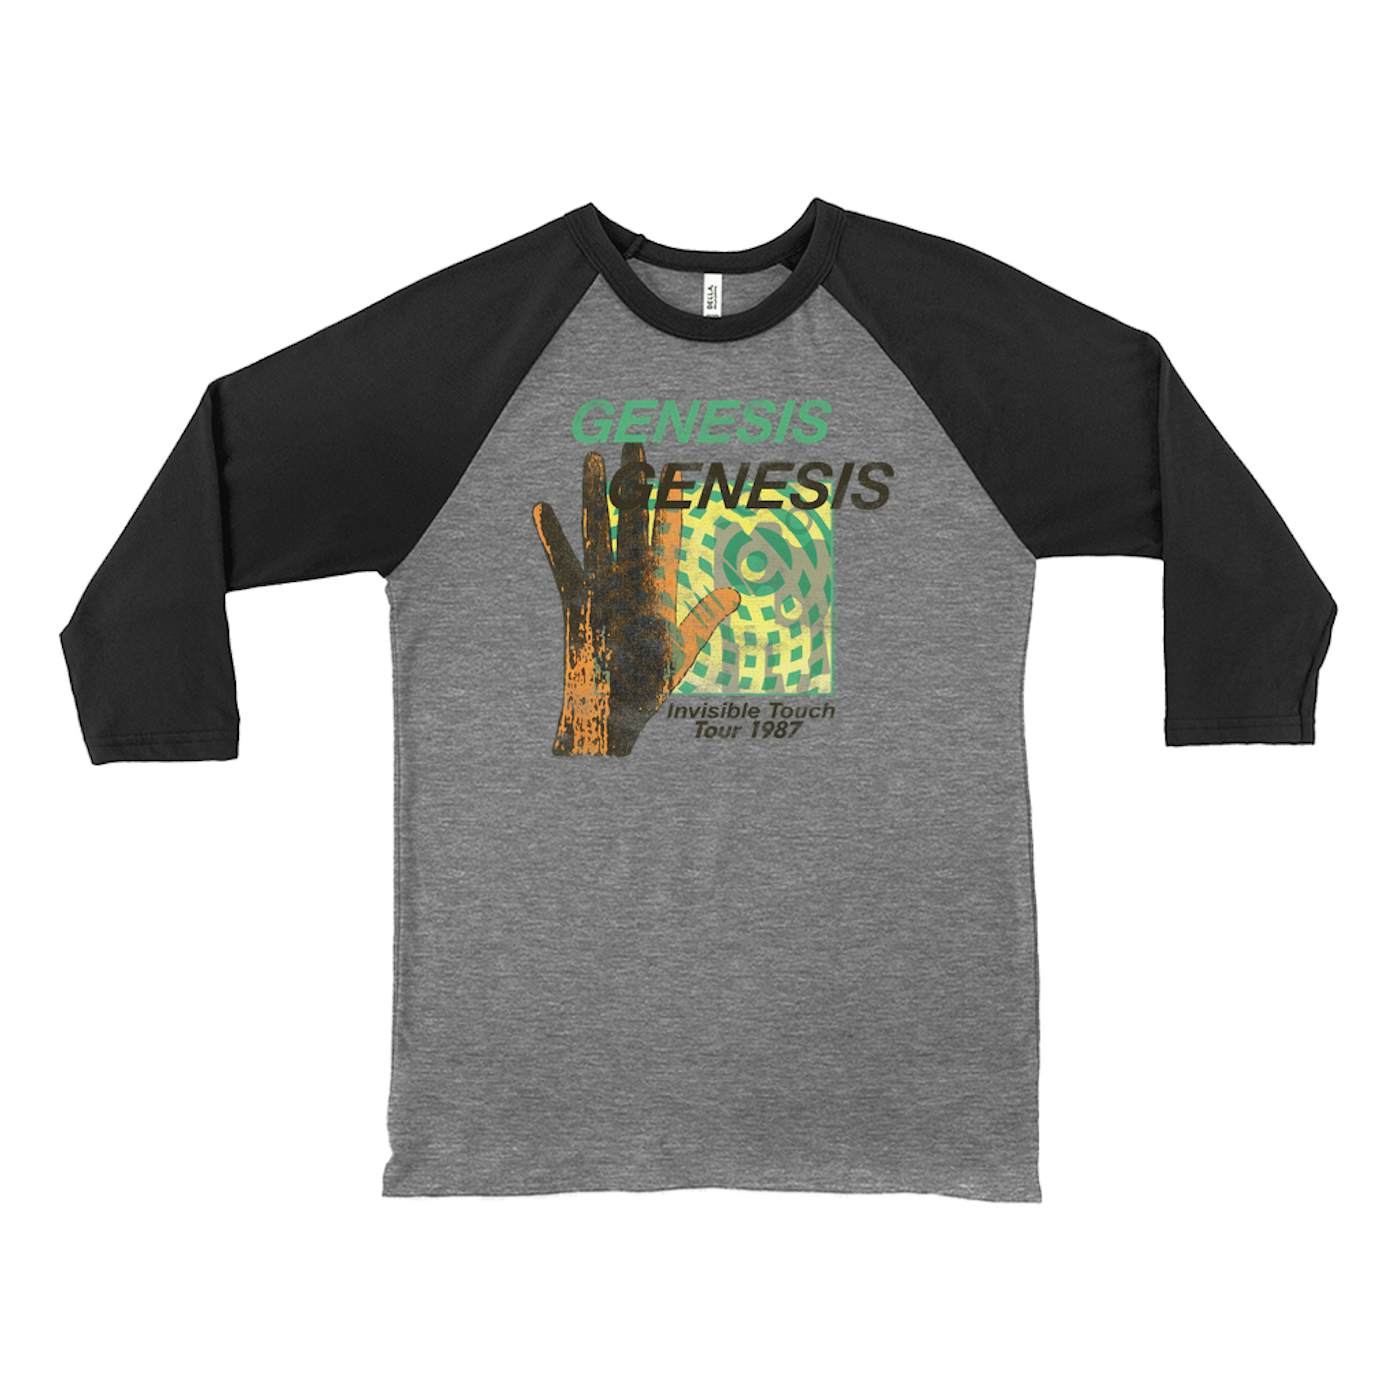 Genesis 3/4 Sleeve Baseball Tee | Invisible Touch 1987 Tour Genesis Shirt